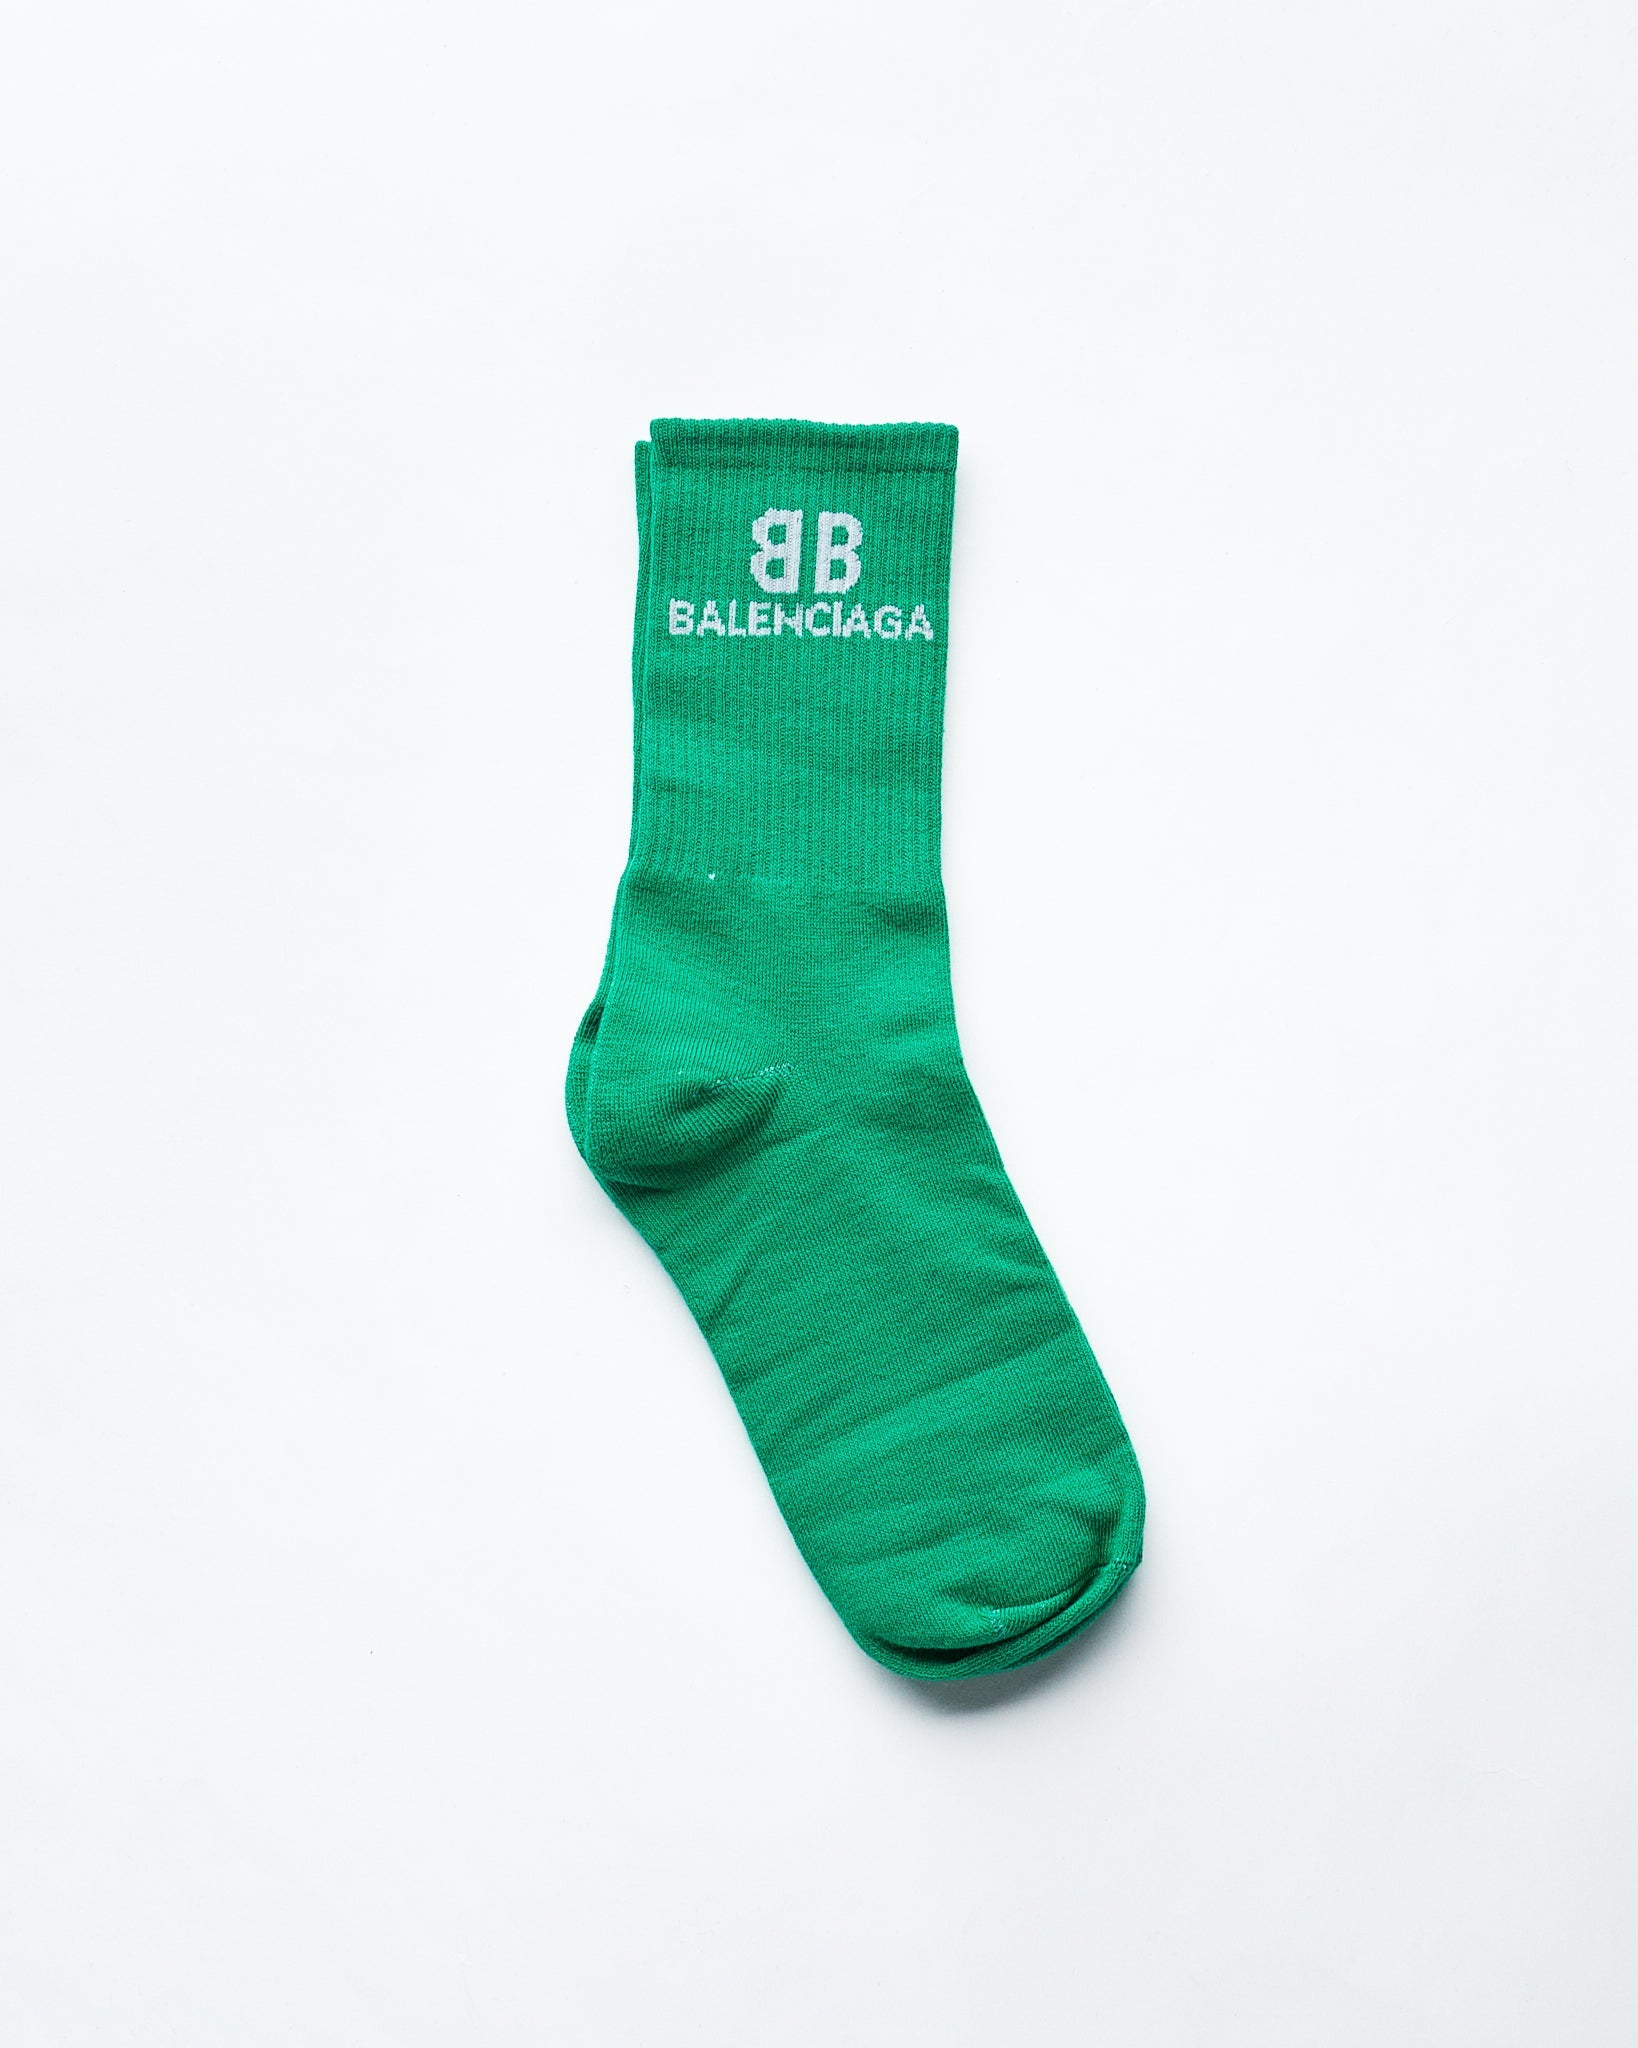 MOI OUTFIT-BB 5 Pairs Quarter Socks 14.90